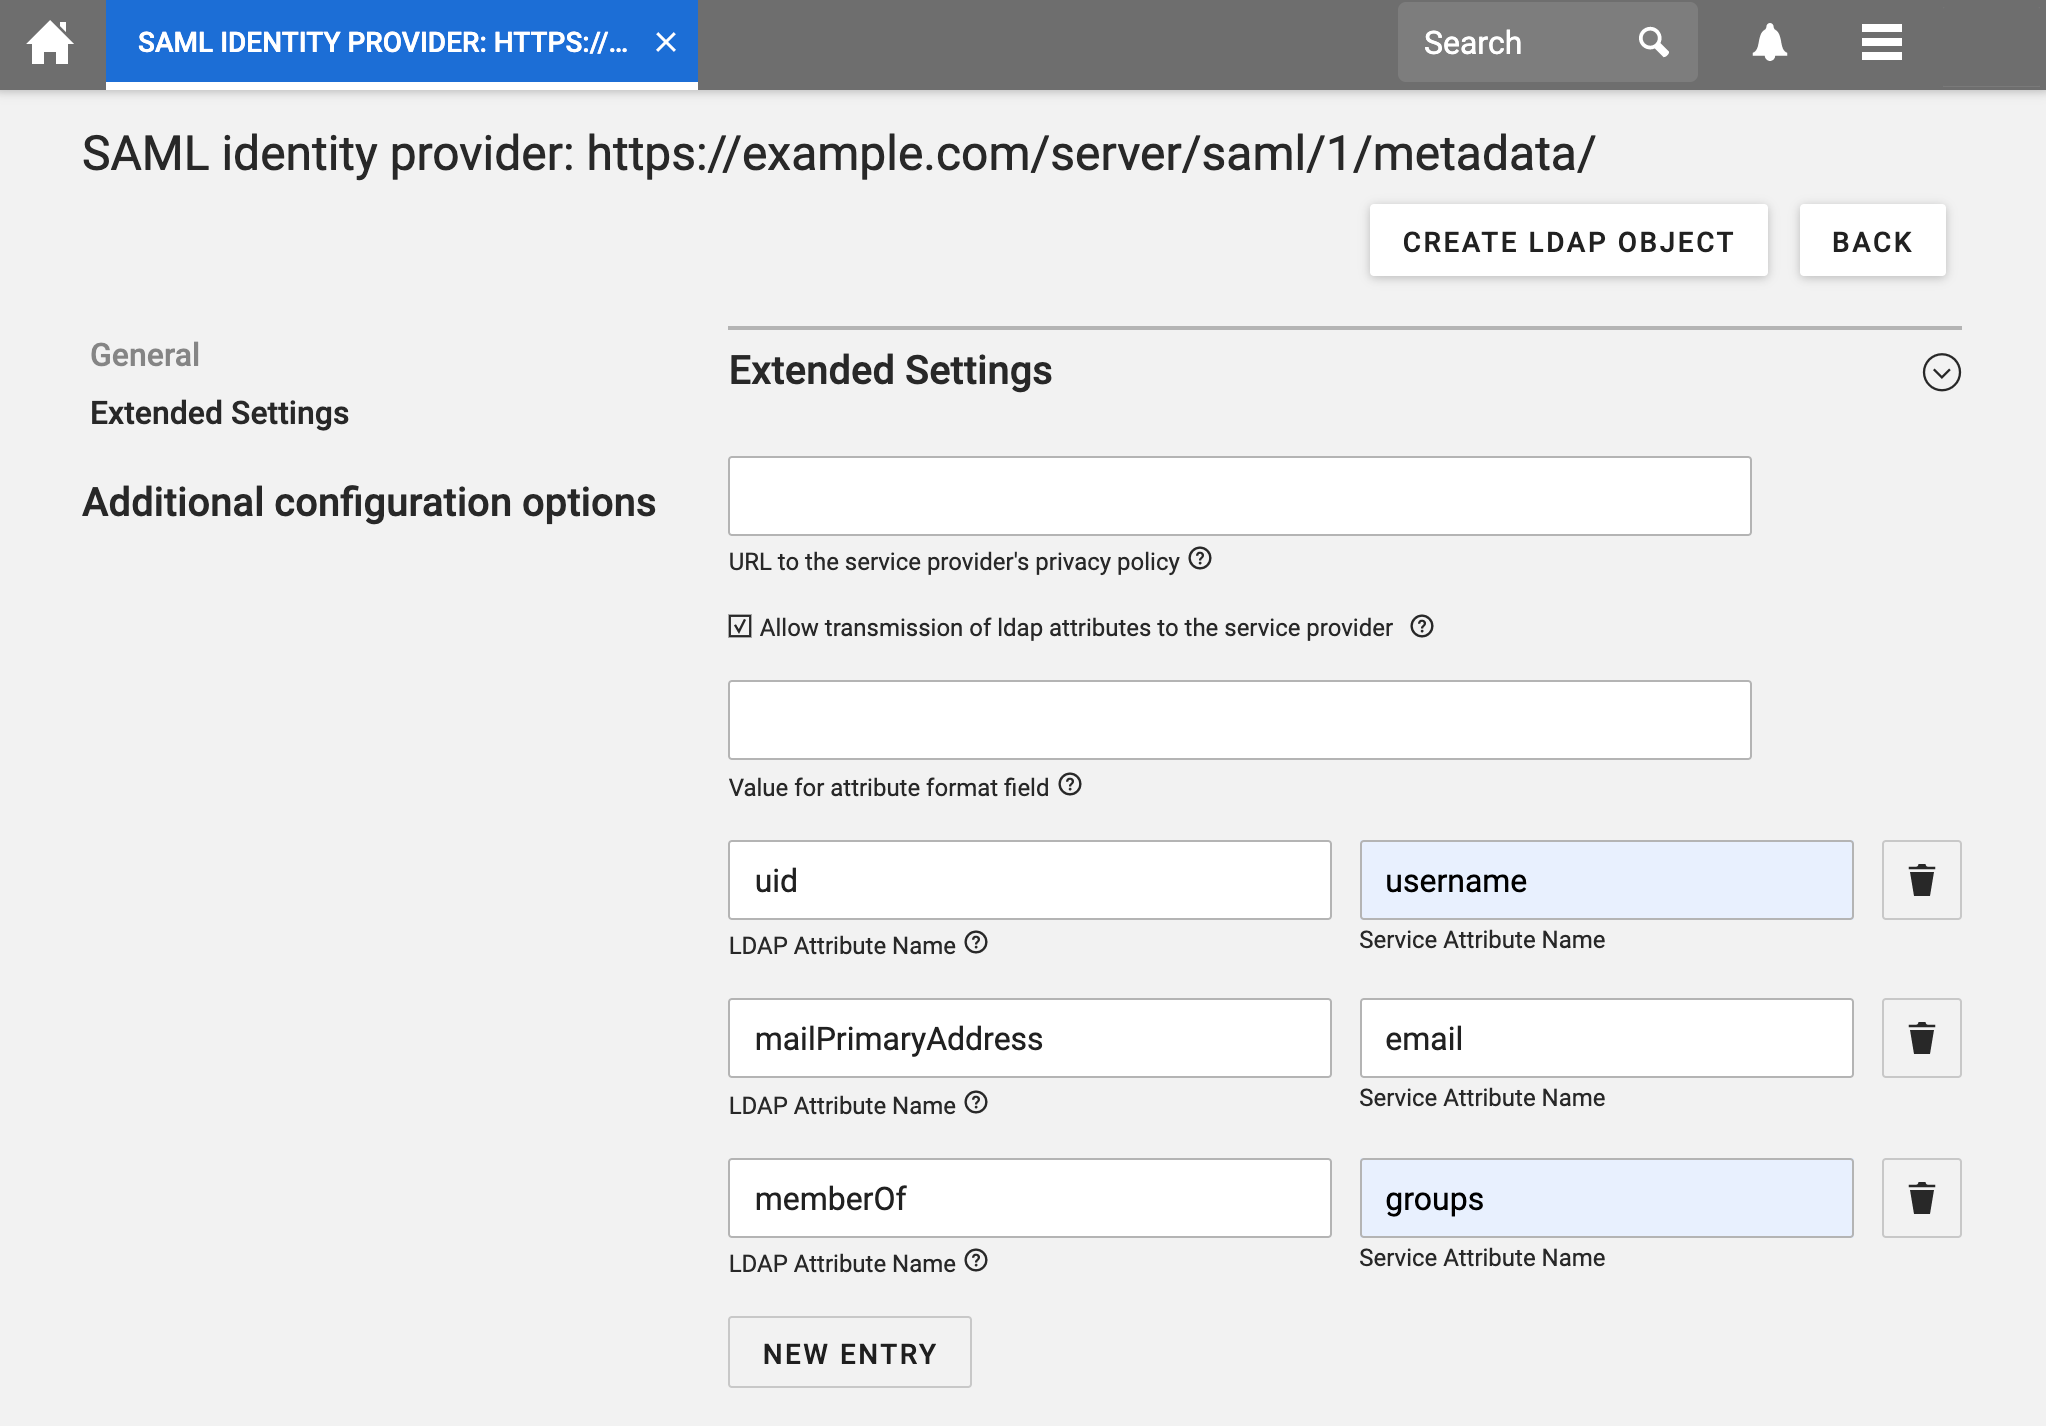 Switch to Extended Settings and fill out the LDAP mapping information